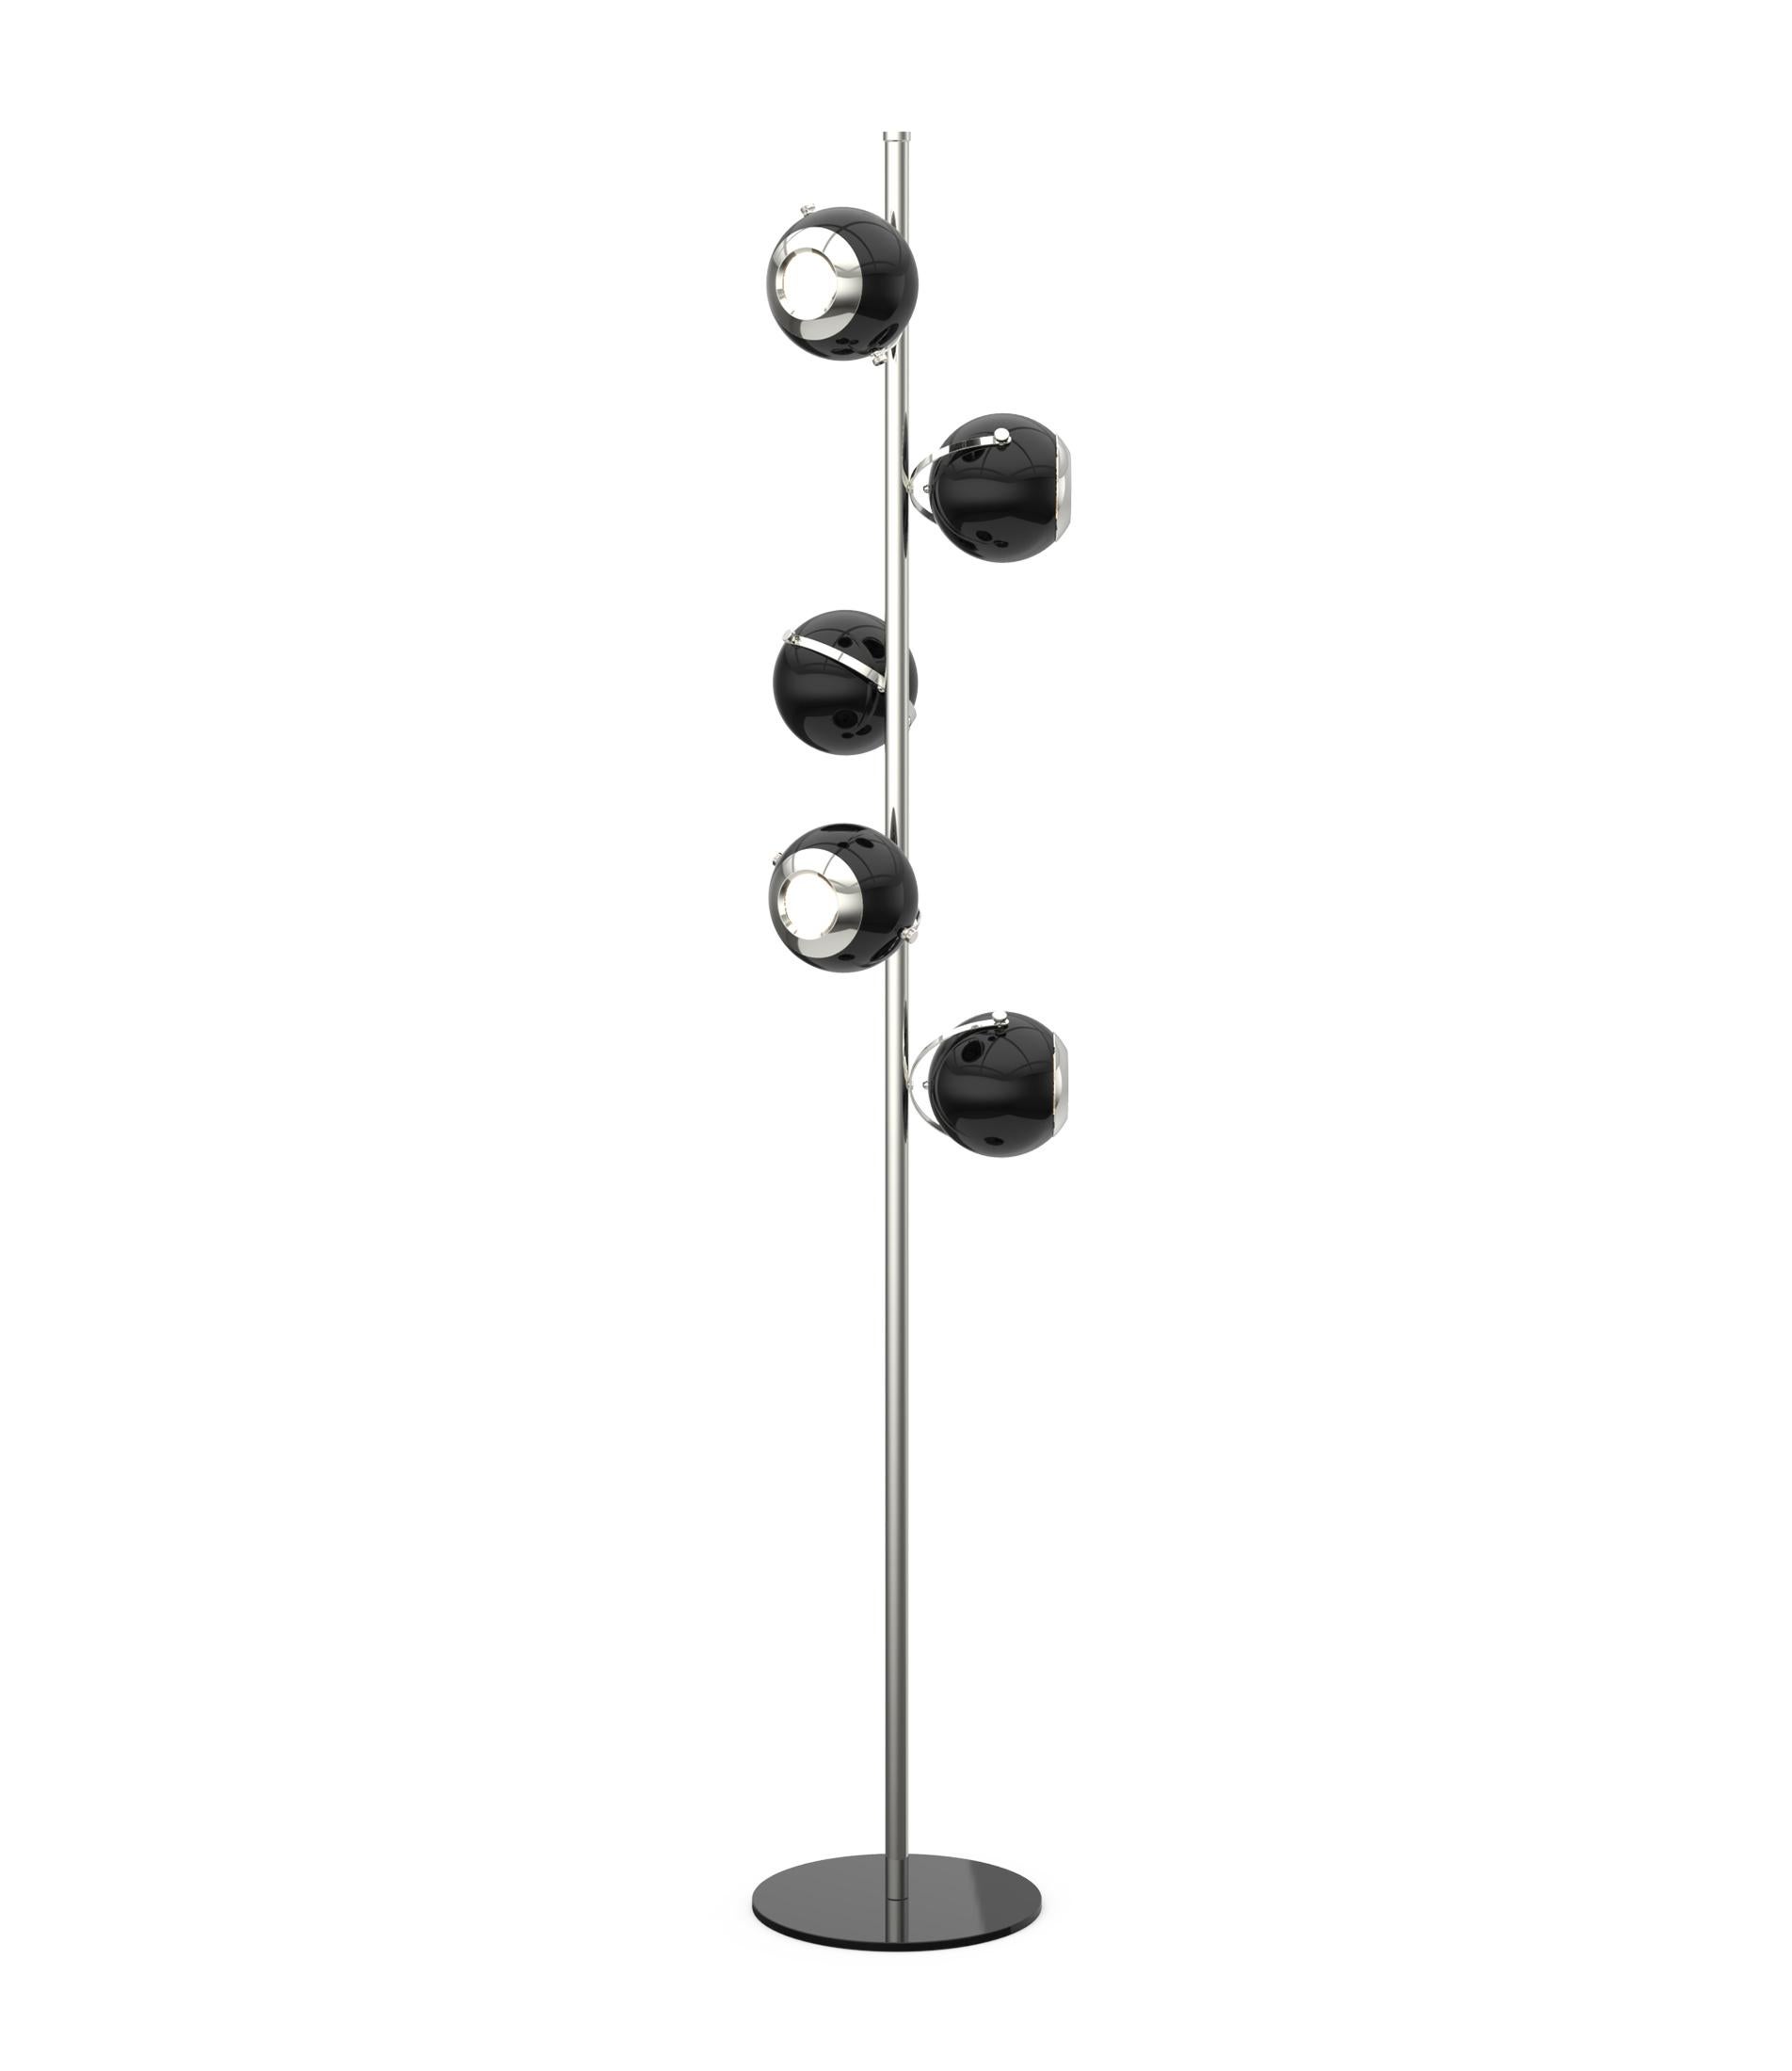 Scofield is an unusual floor lamp with five chrome lights all supported by a white brass base. Each light and bracket rotate separately allowing different light focuses. The Mid-Century Modern floor lamp has round lamp shades in aluminum, that can